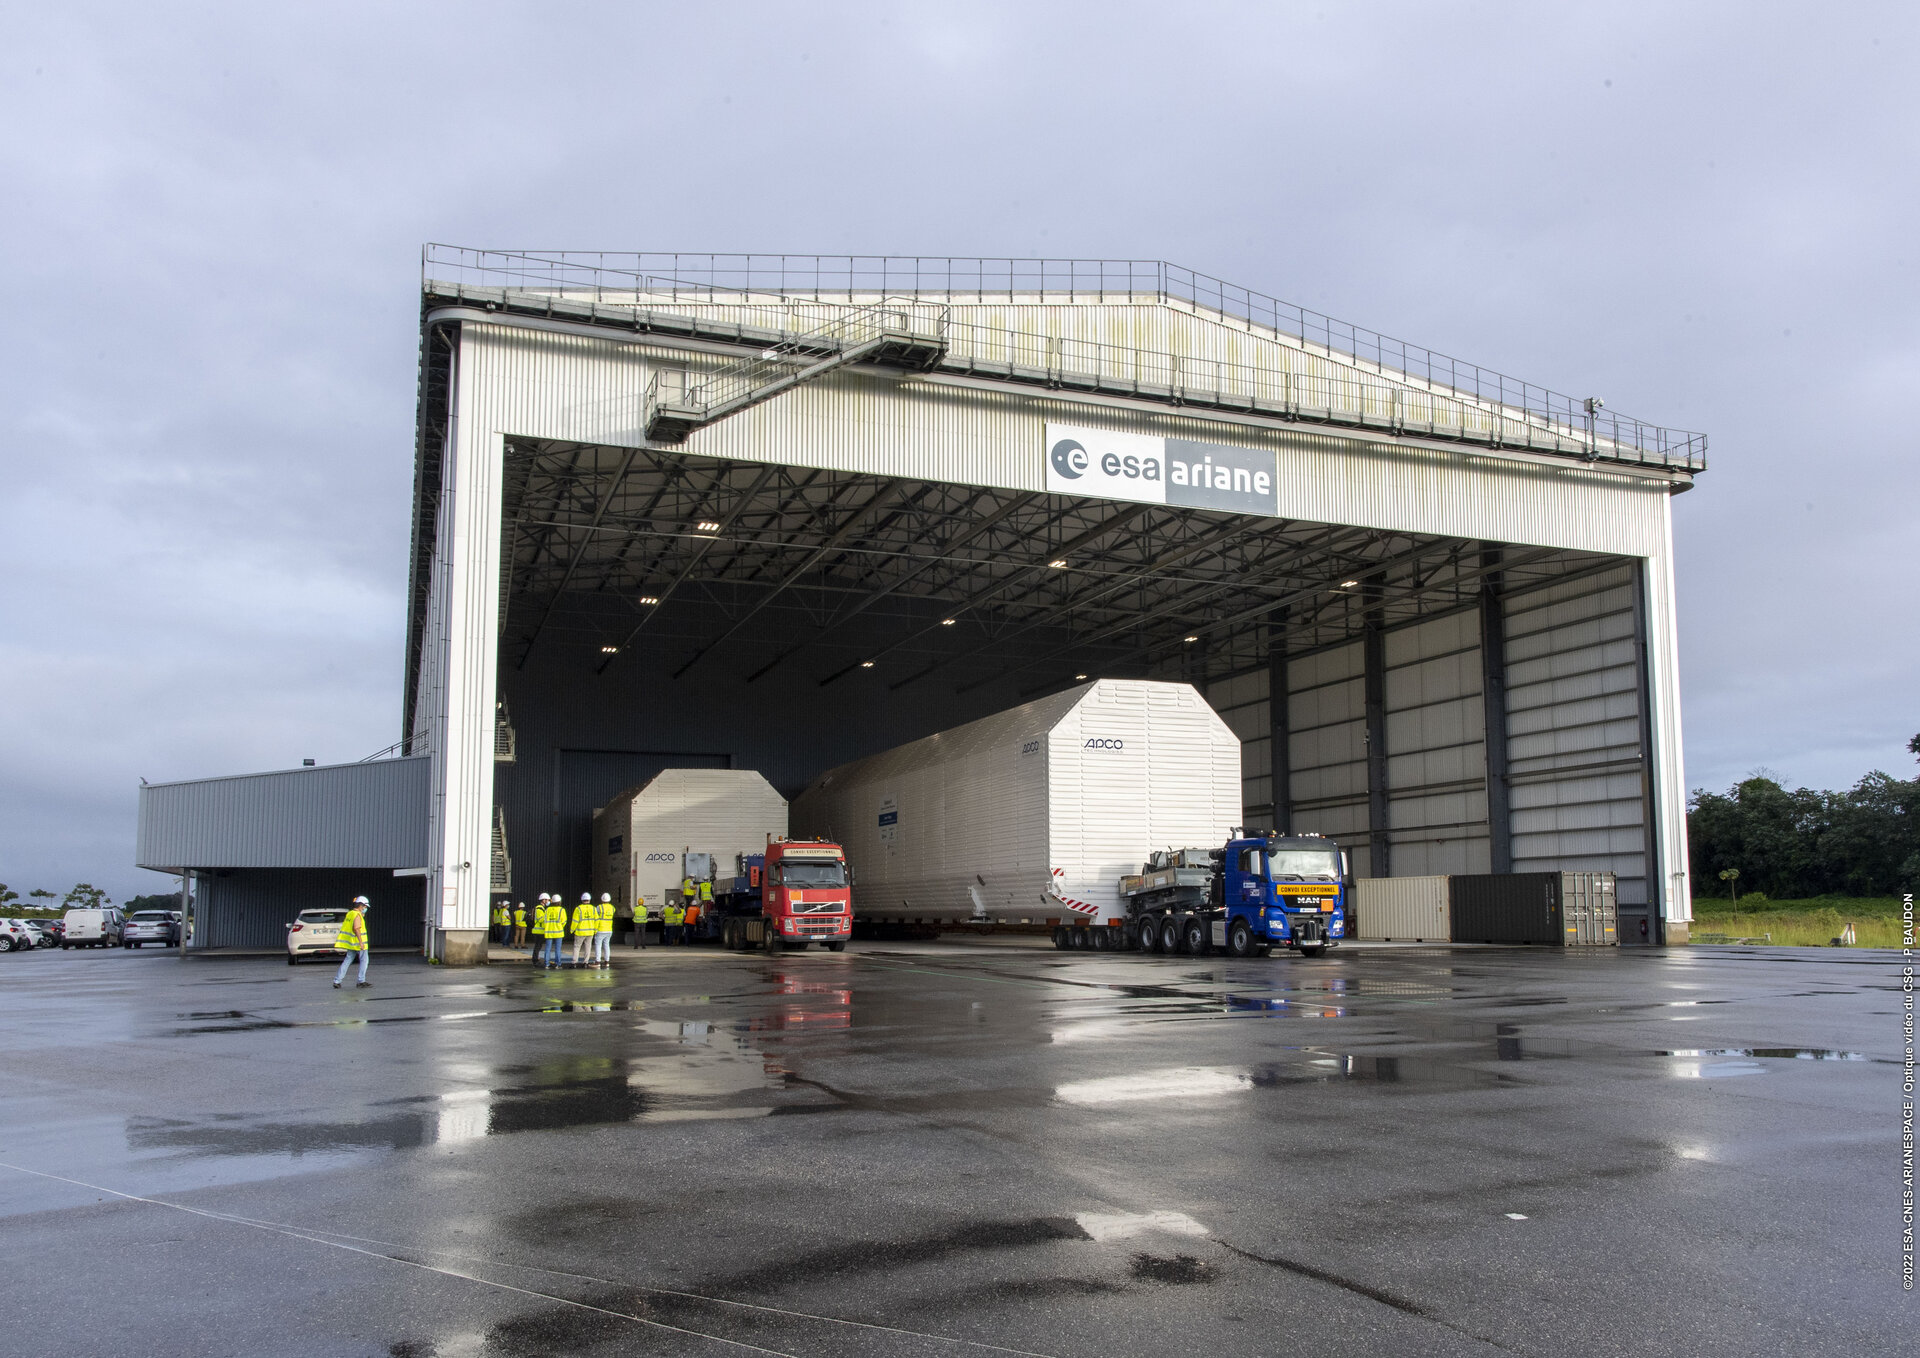 Ariane 6 central core reaches the assembly building at Europe's Spaceport